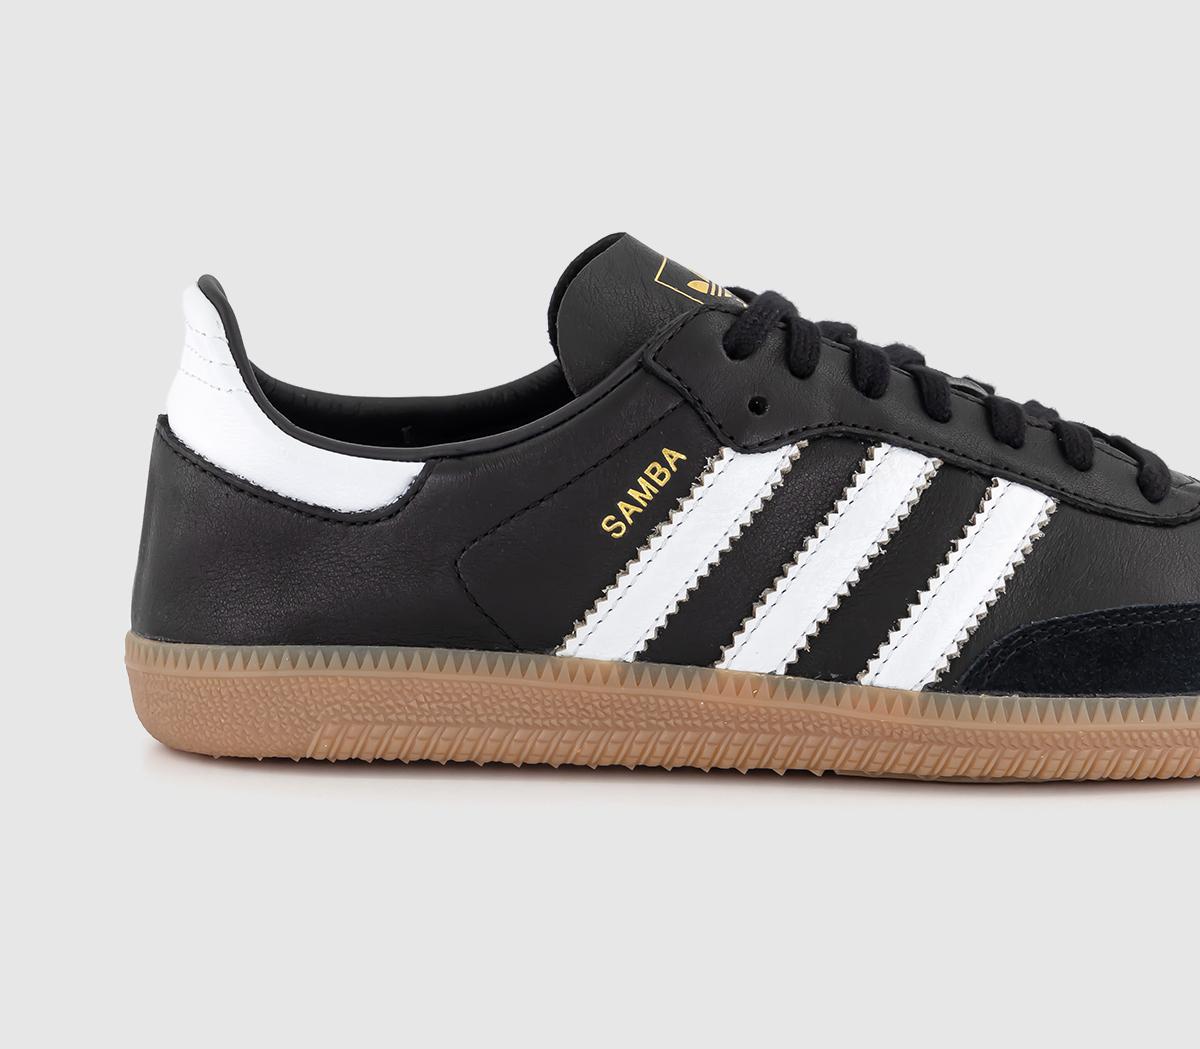 adidas Samba Collapsible Trainers Black - Men's Trainers